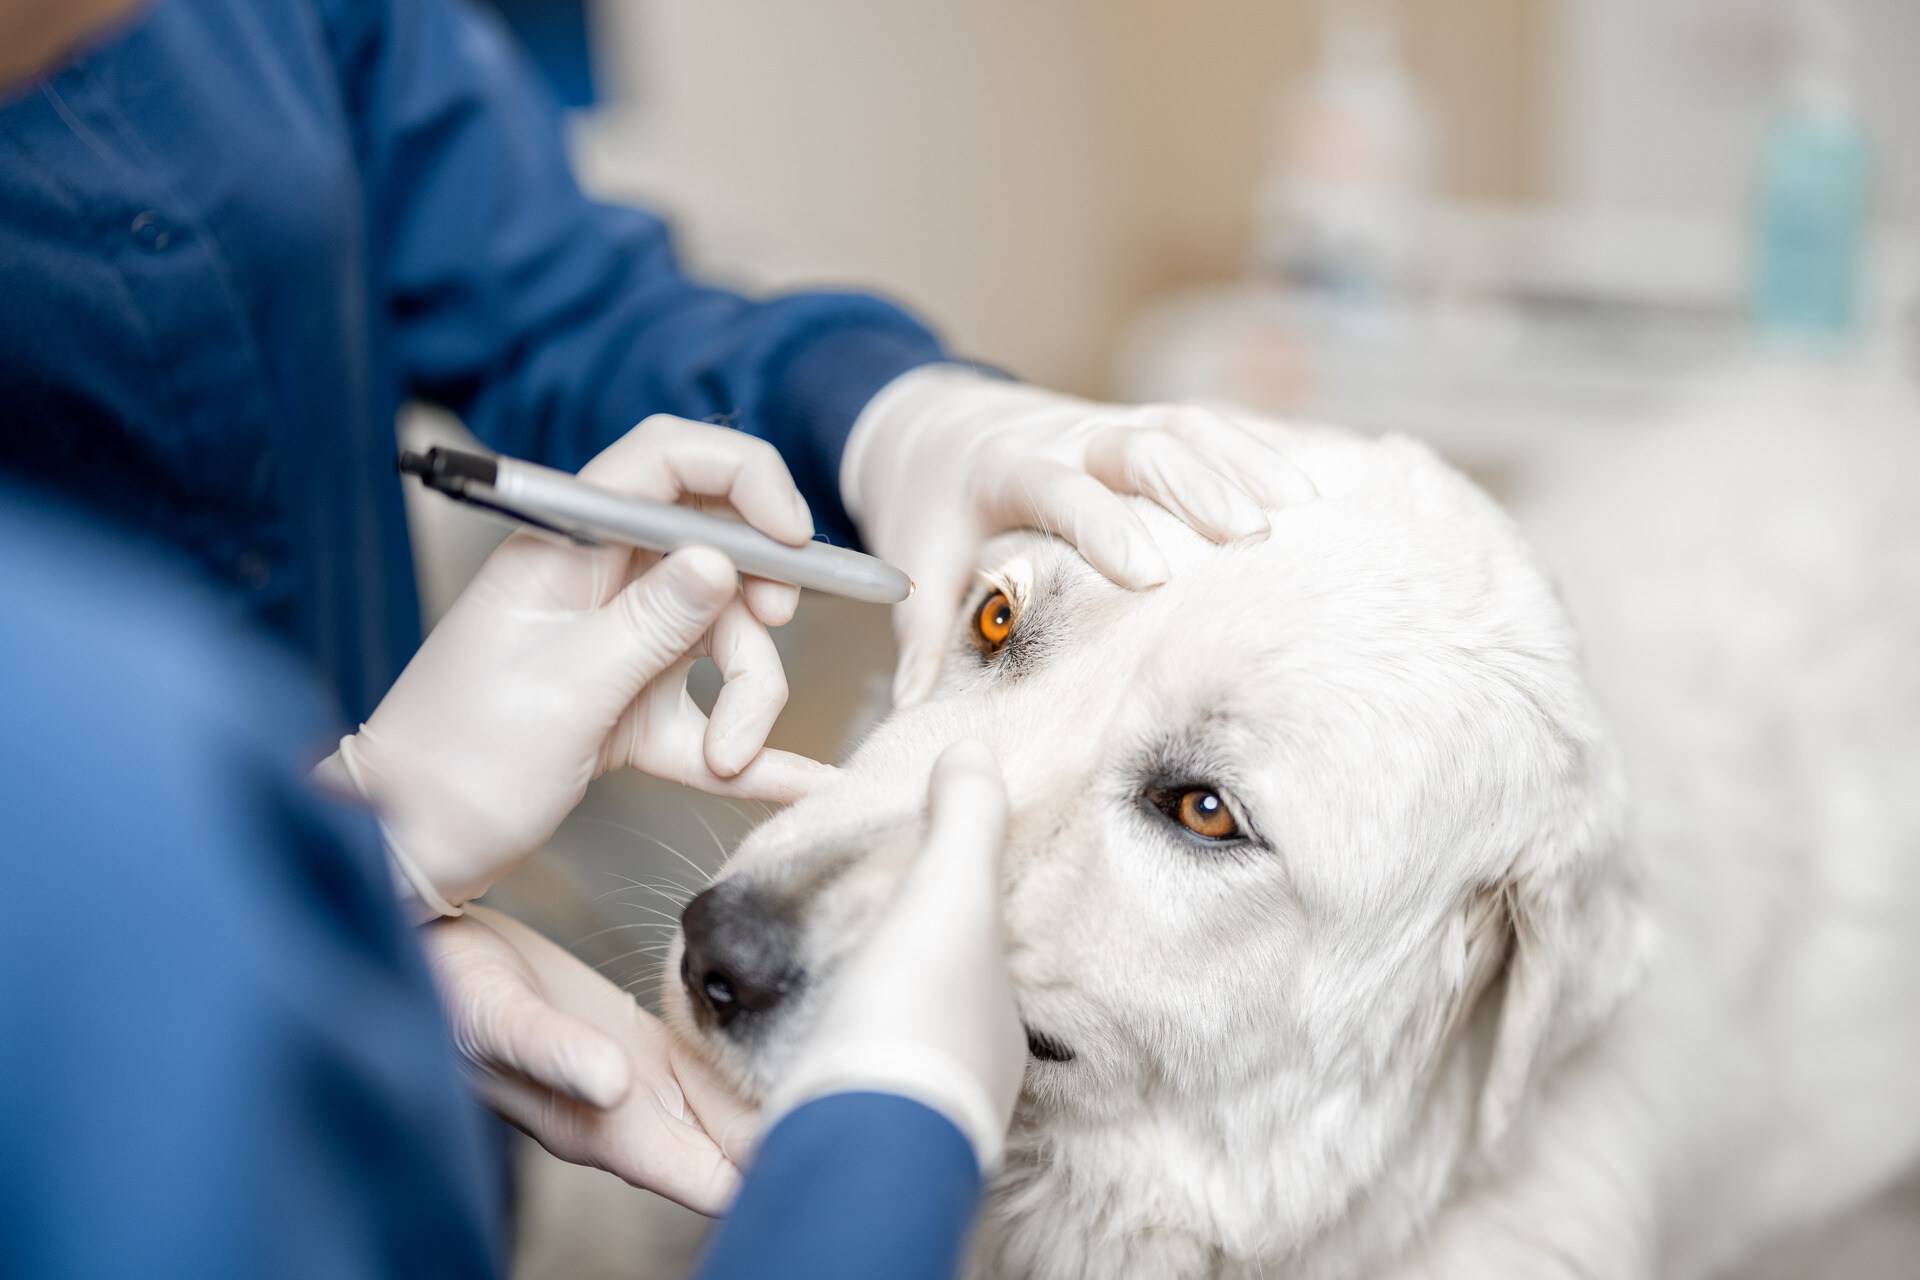 A vet inspecting a dog's eyes at a clinic